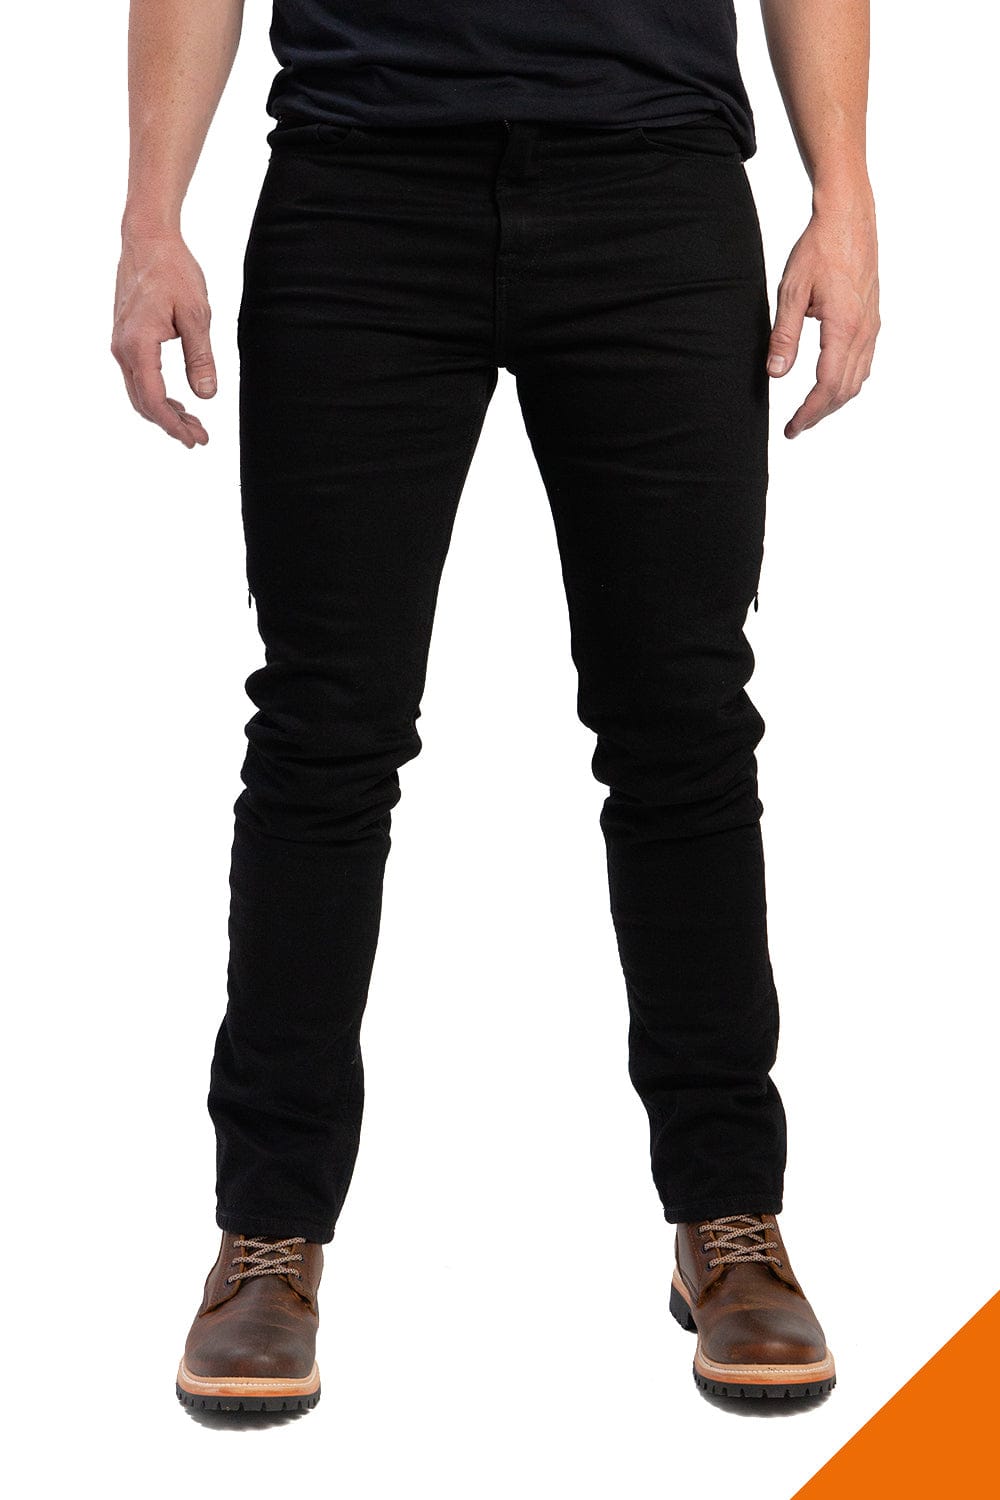 Ironsides Black - Armored Jeans